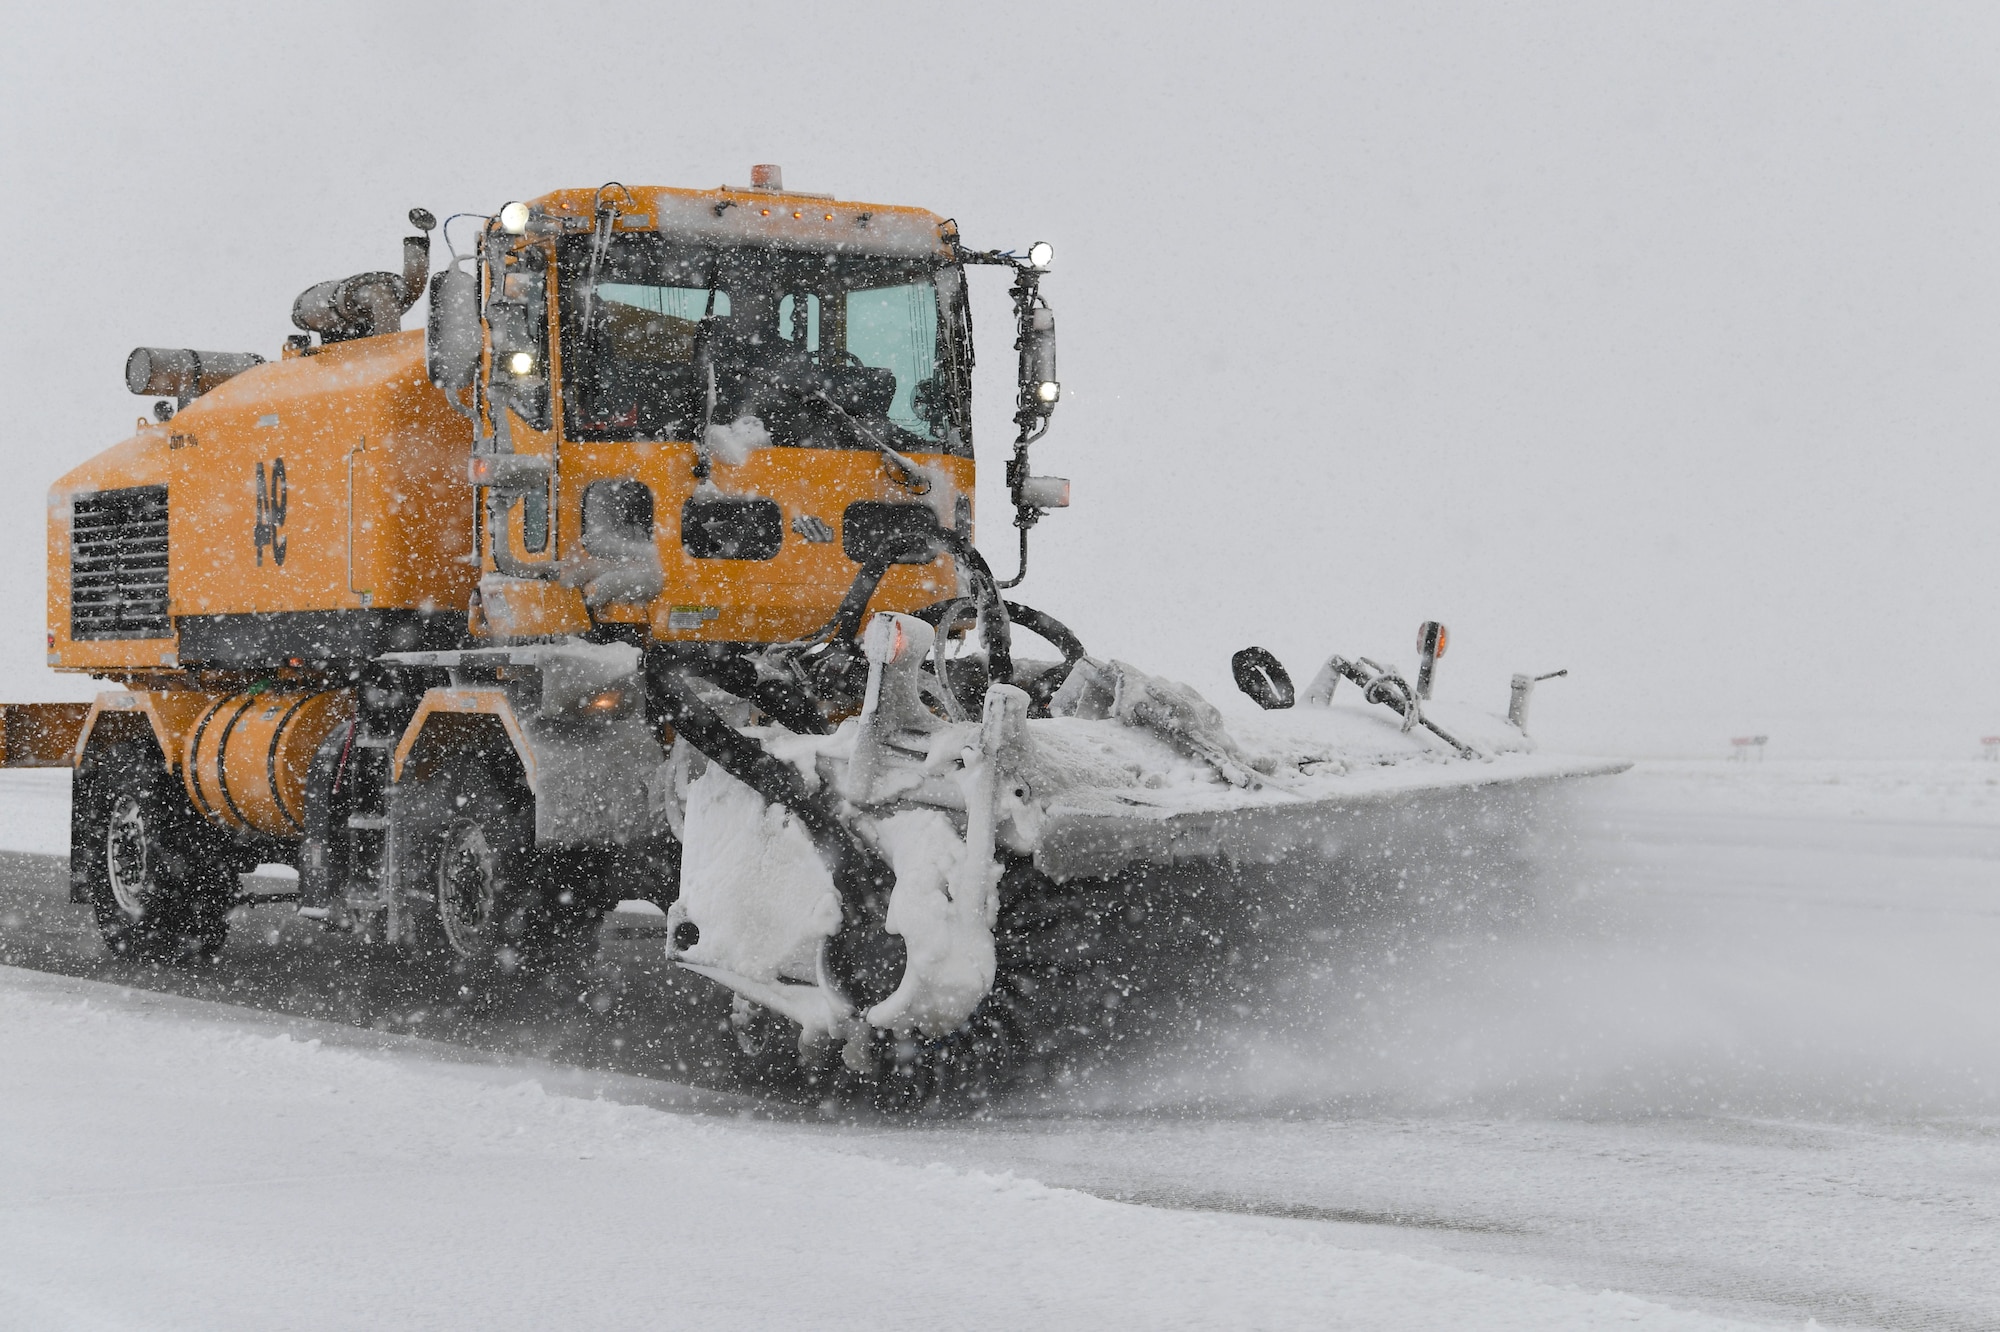 A large snow blower removes snow from the flight line.